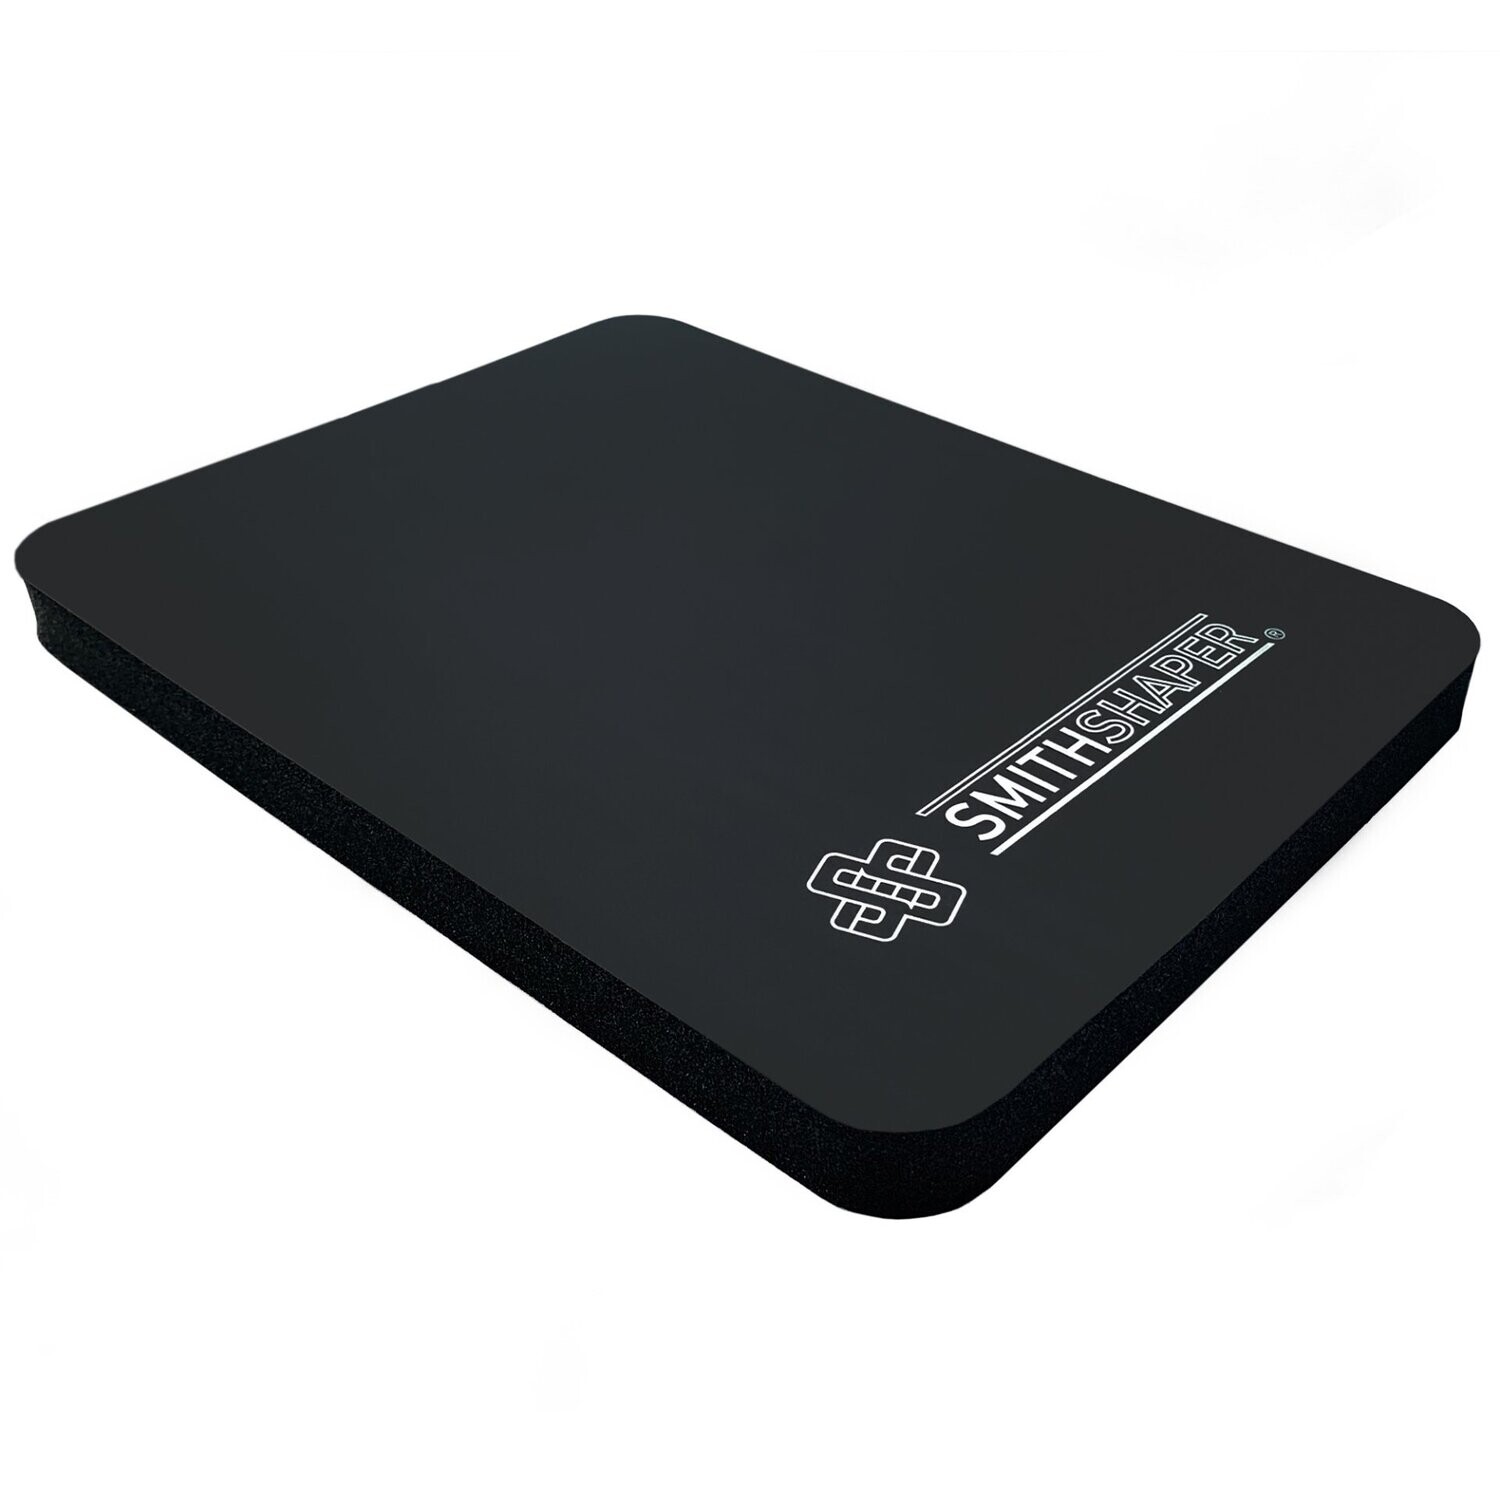 Super Pad Thick Exercise Kneeling Pad